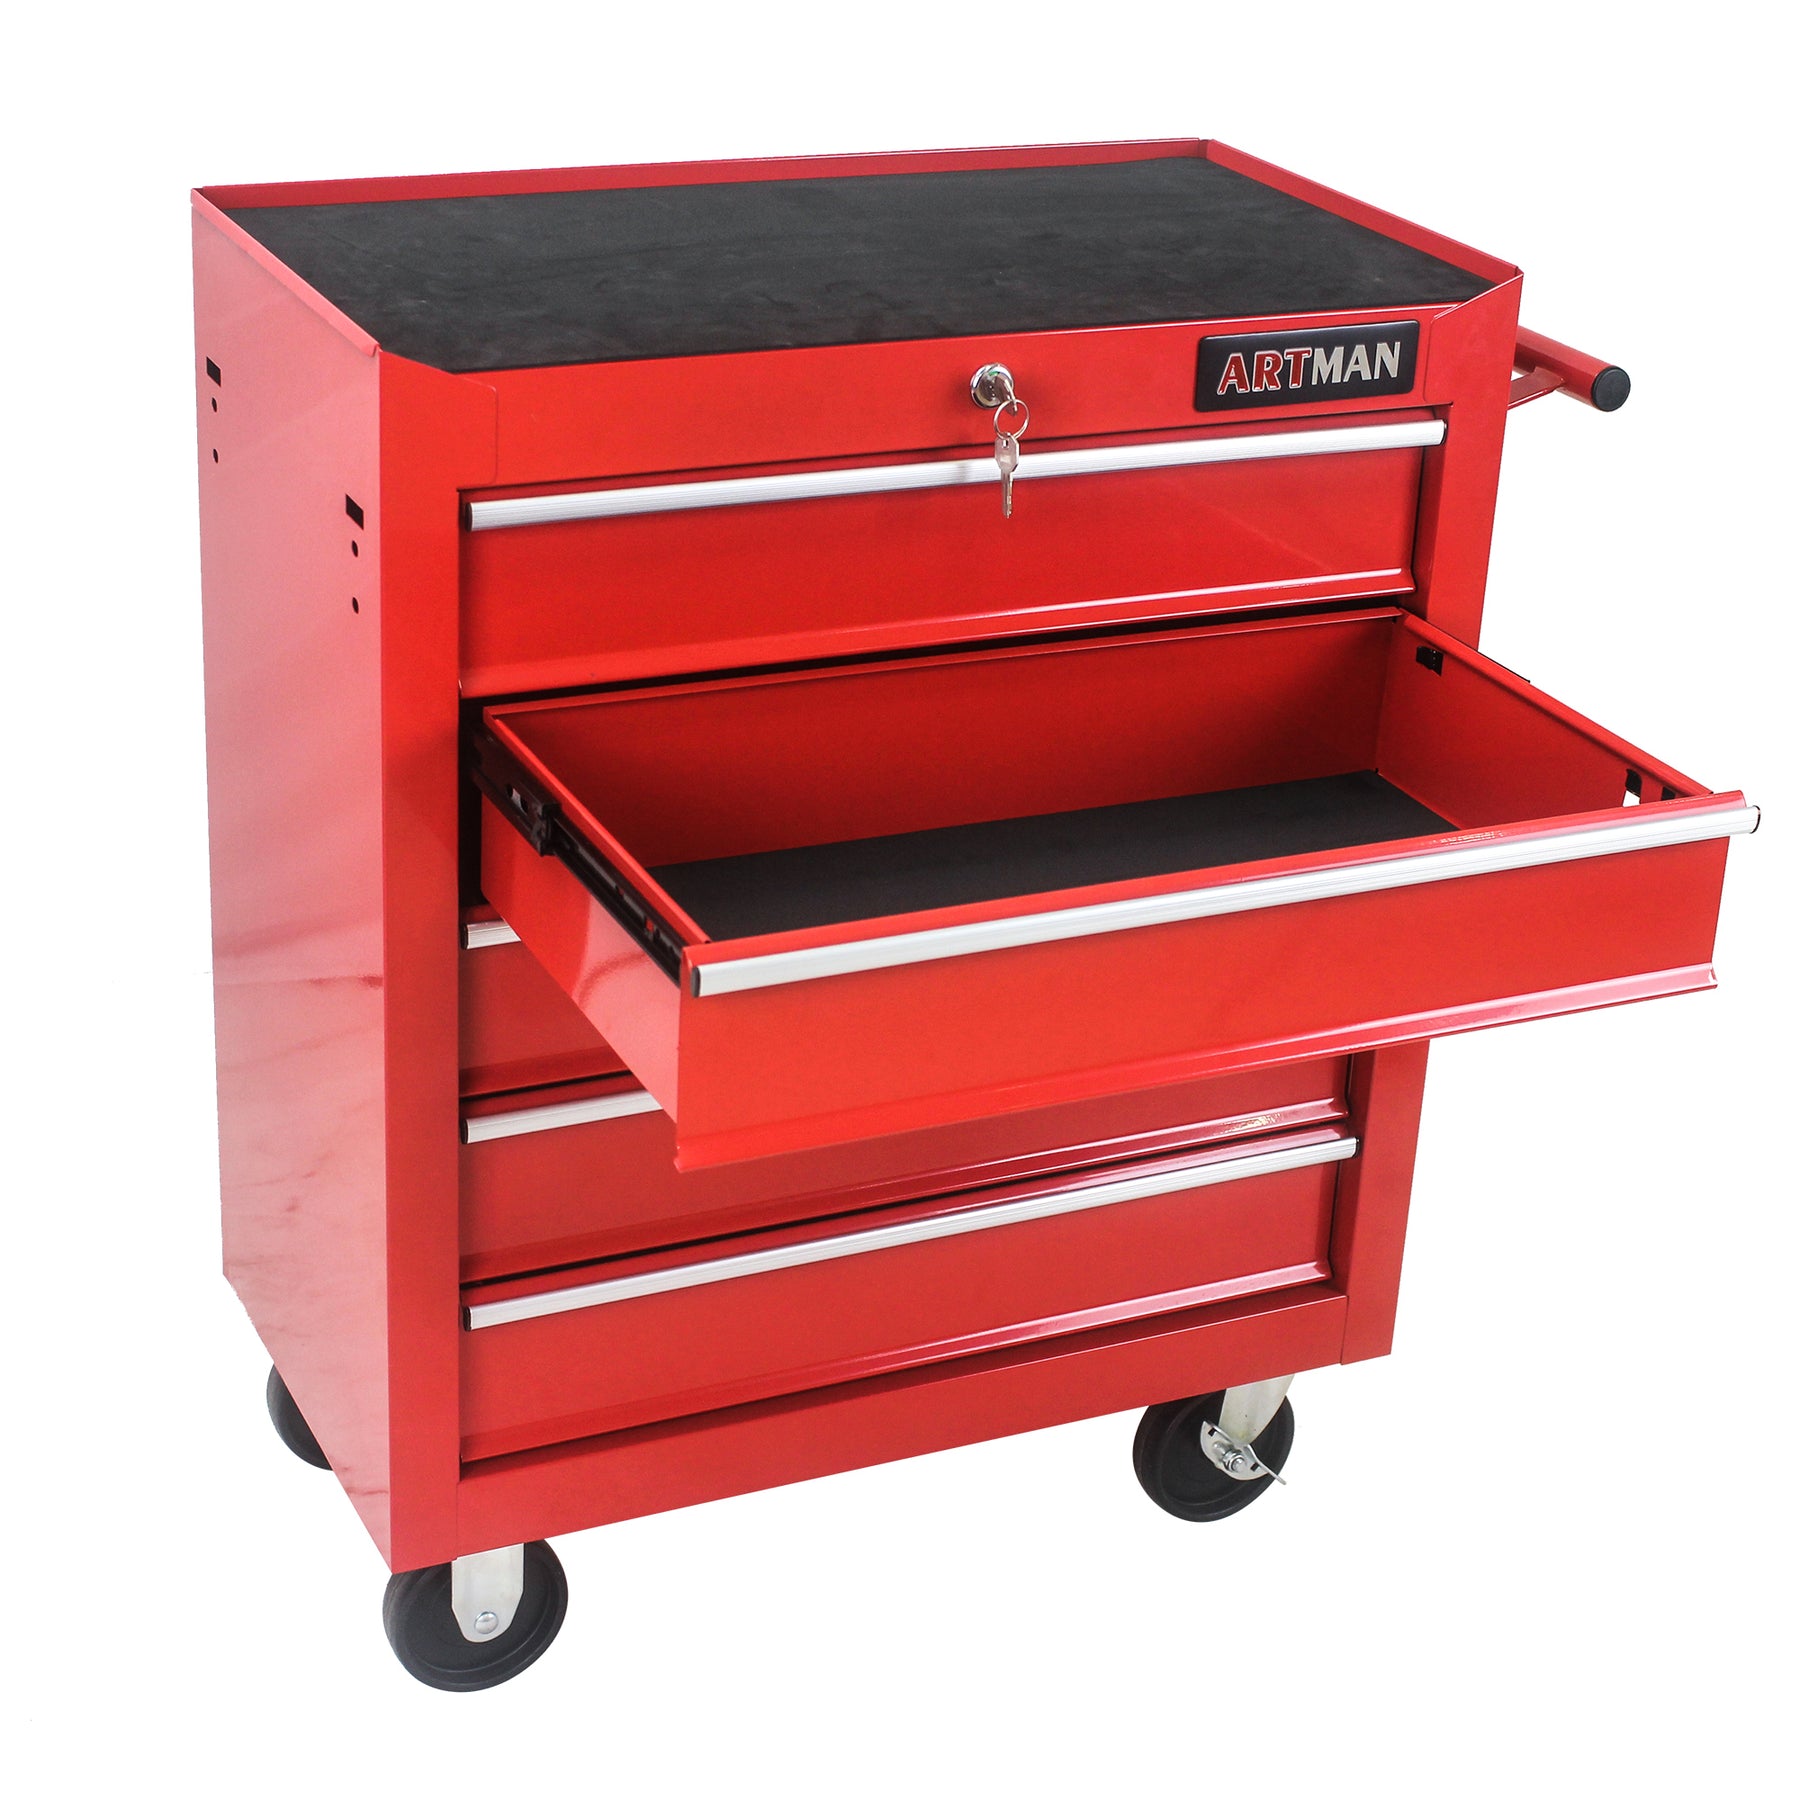 5 DRAWERS MULTIFUNCTIONAL TOOL CART WITH WHEELS-RED - Tonkn